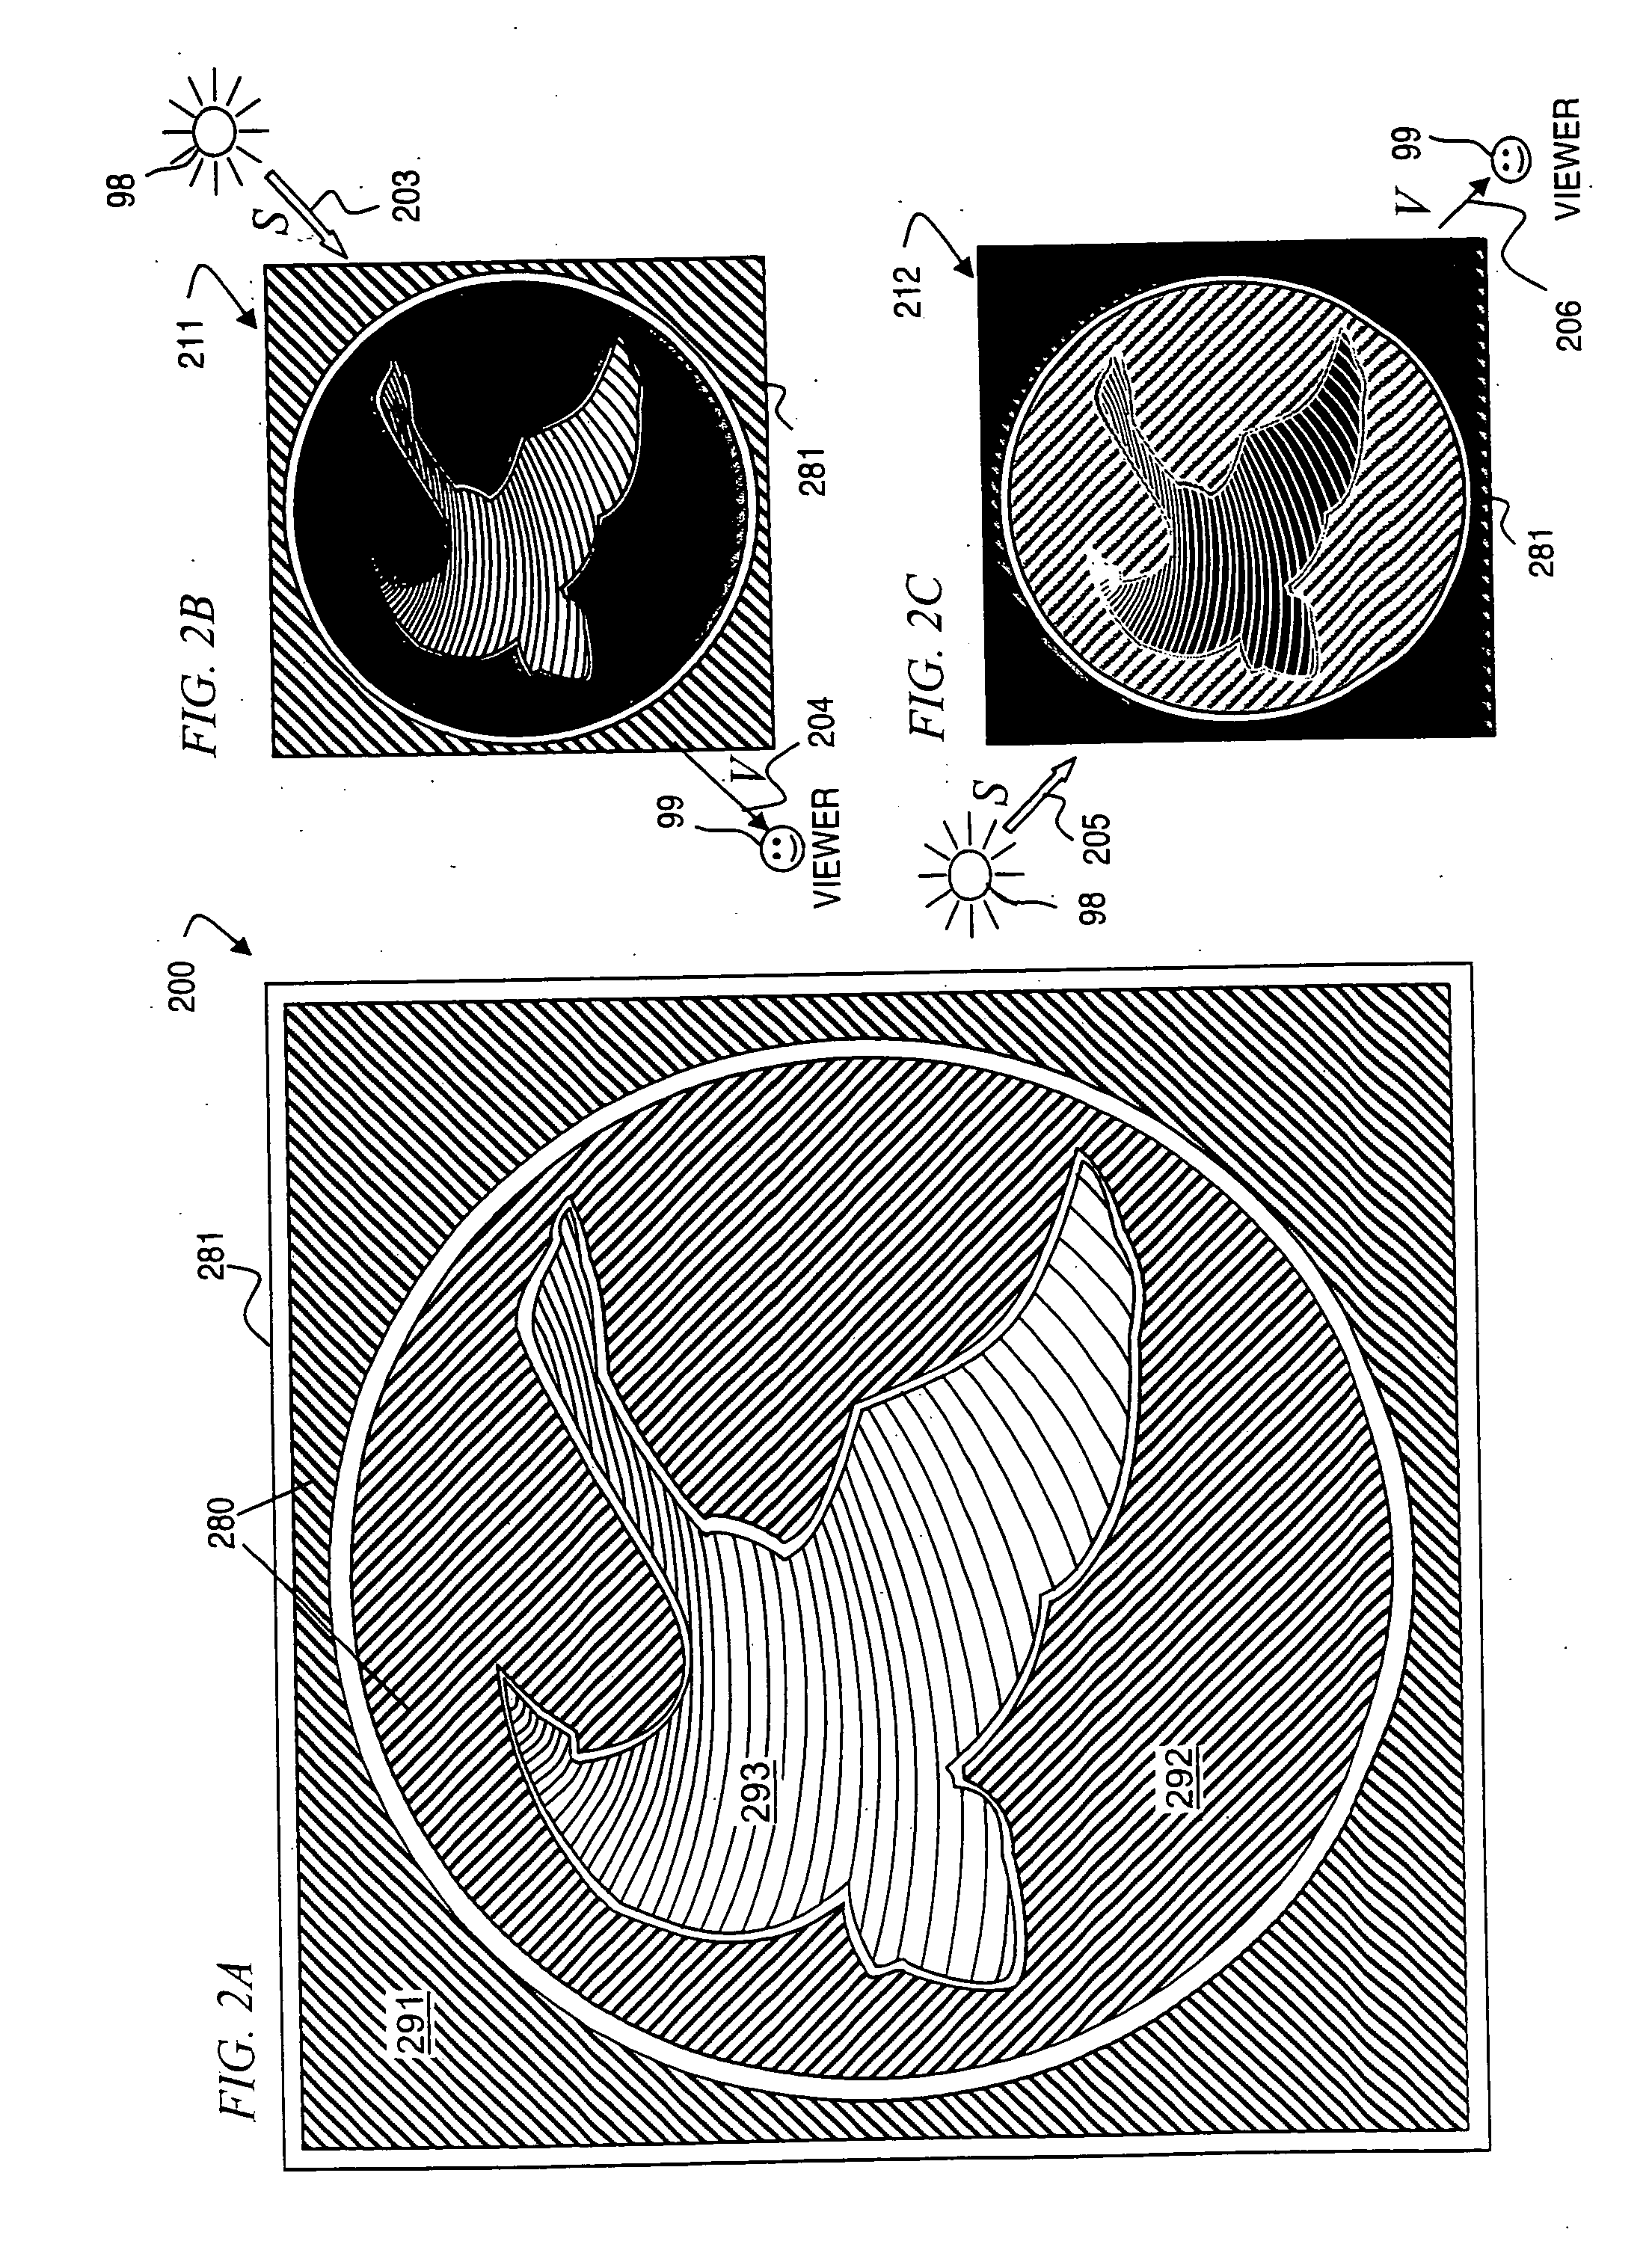 Apparatus and method for producing light-responsive surfaces on opaque materials